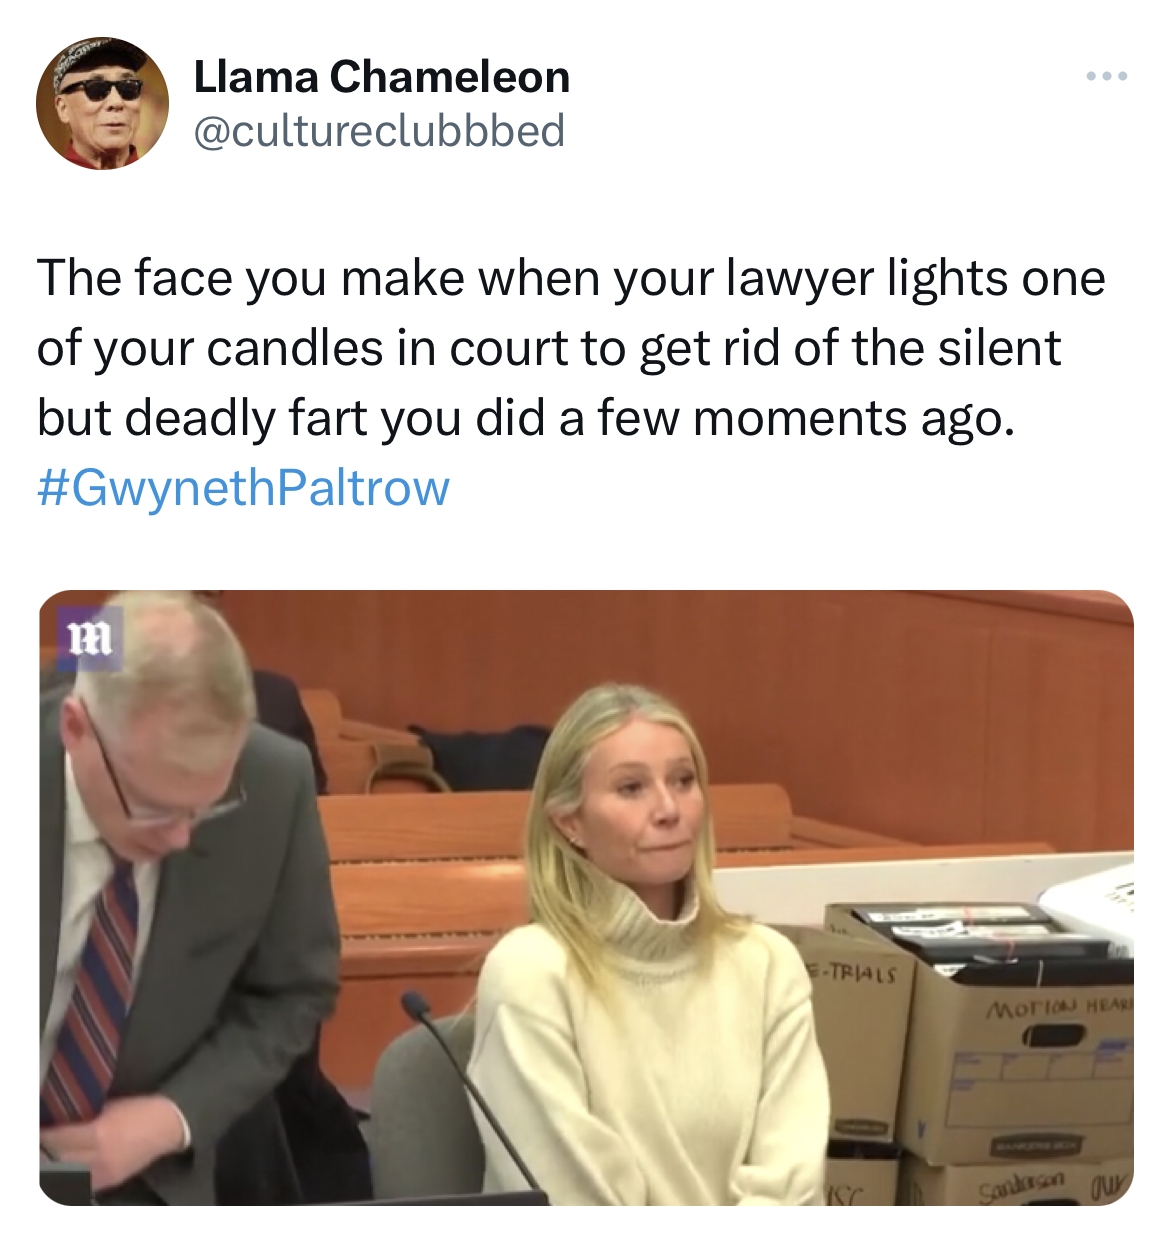 Gwyneth Paltrow Jeffrey Dahmer memes - presentation - Llama Chameleon The face you make when your lawyer lights one of your candles in court to get rid of the silent but deadly fart you did a few moments ago. Paltrow m Triale Mortal Sandrun our